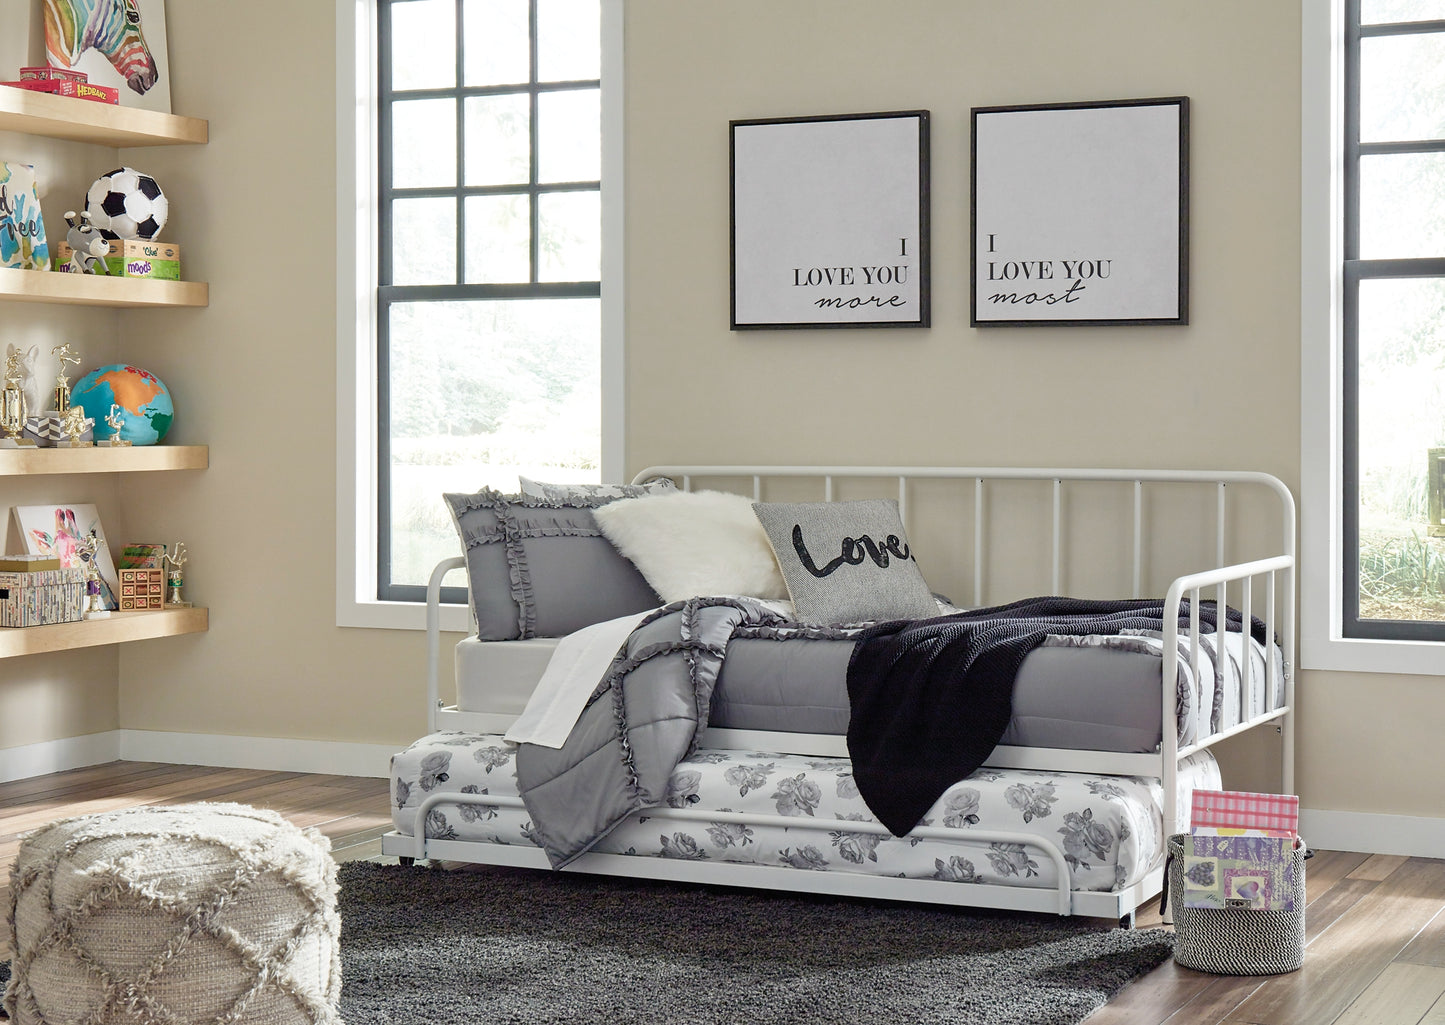 Trentlore Twin Metal Day Bed with Trundle